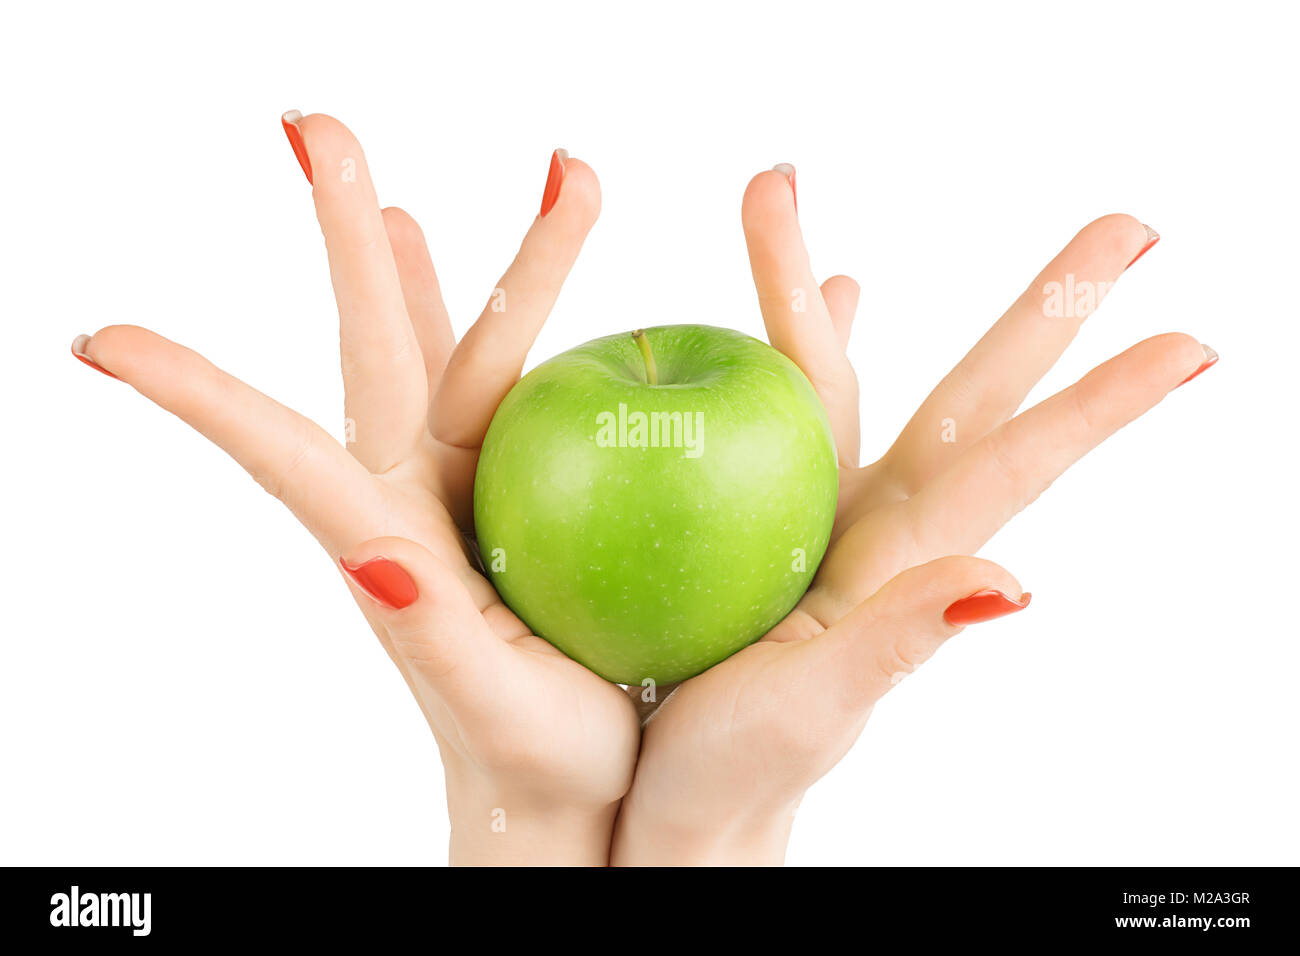 Woman hands with red nails polish and perfect skin holding green apple. Isolated on white, clipping path included Stock Photo